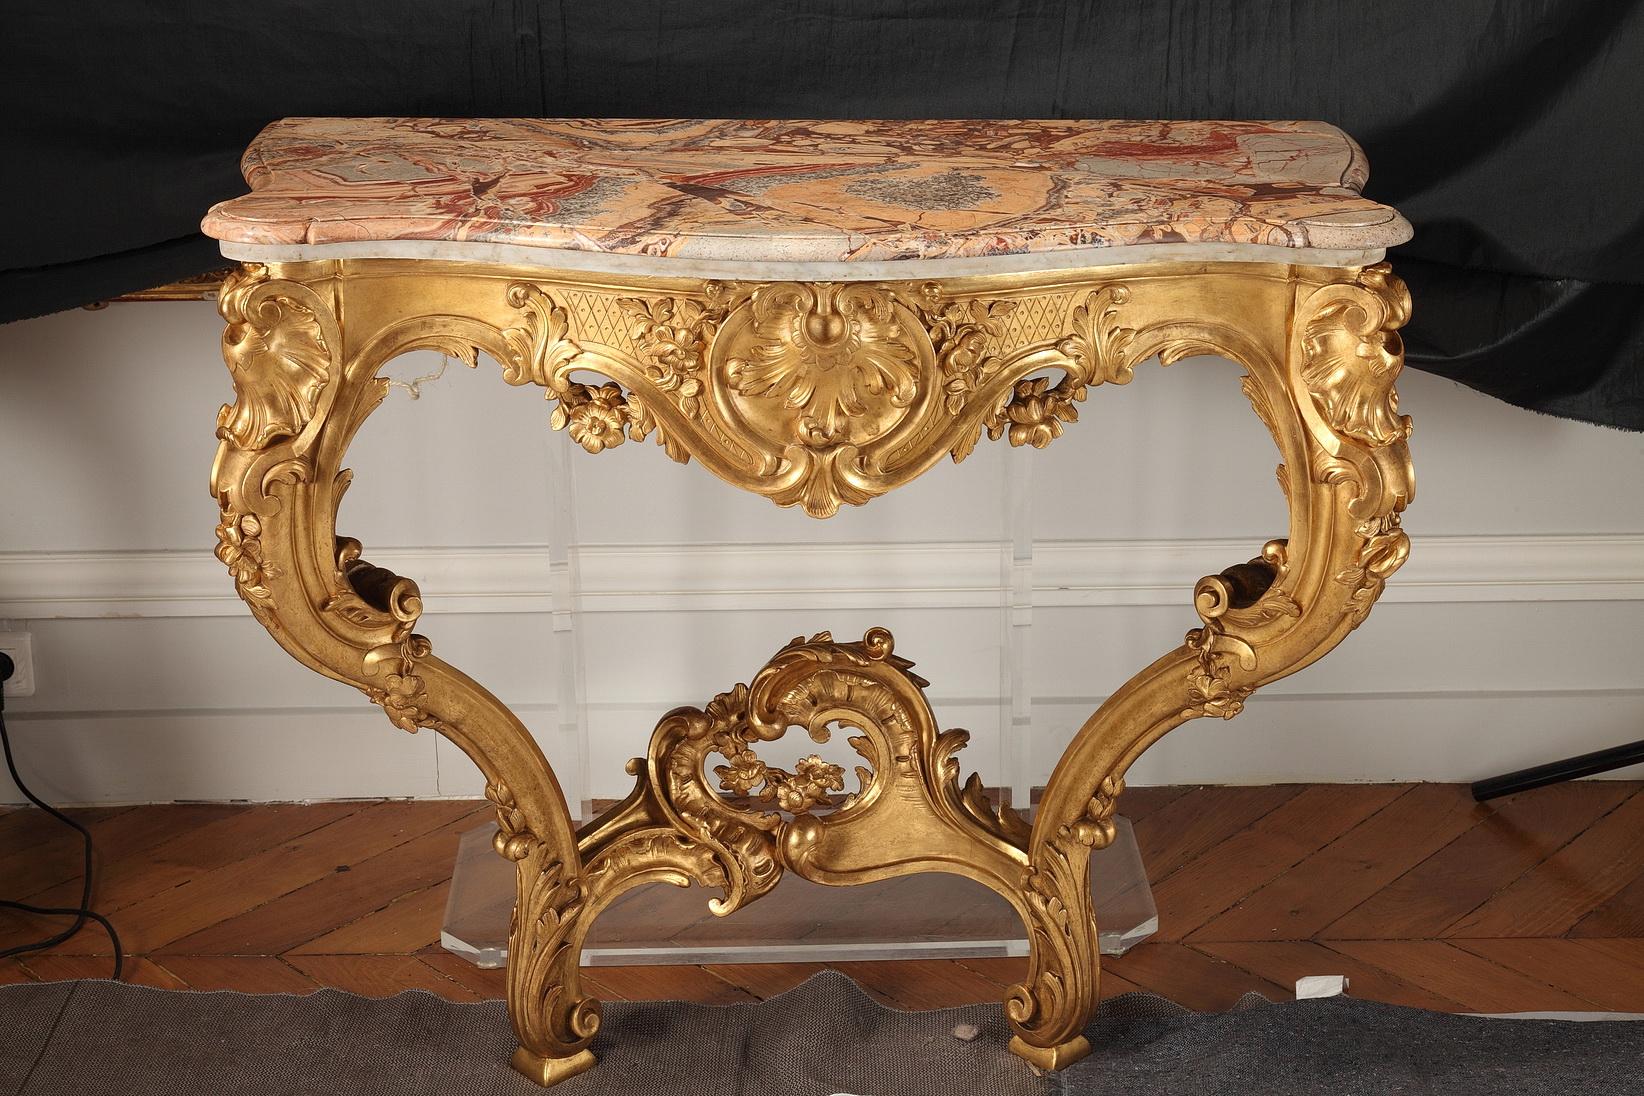 The giltwood console table has a marble top above a large foliated giltwood pattern, reying on two volute legs joined by a stretcher with asymmetrical foliated ornament. The mirror with a rectangular plate bordered by two giltwood mouldings,